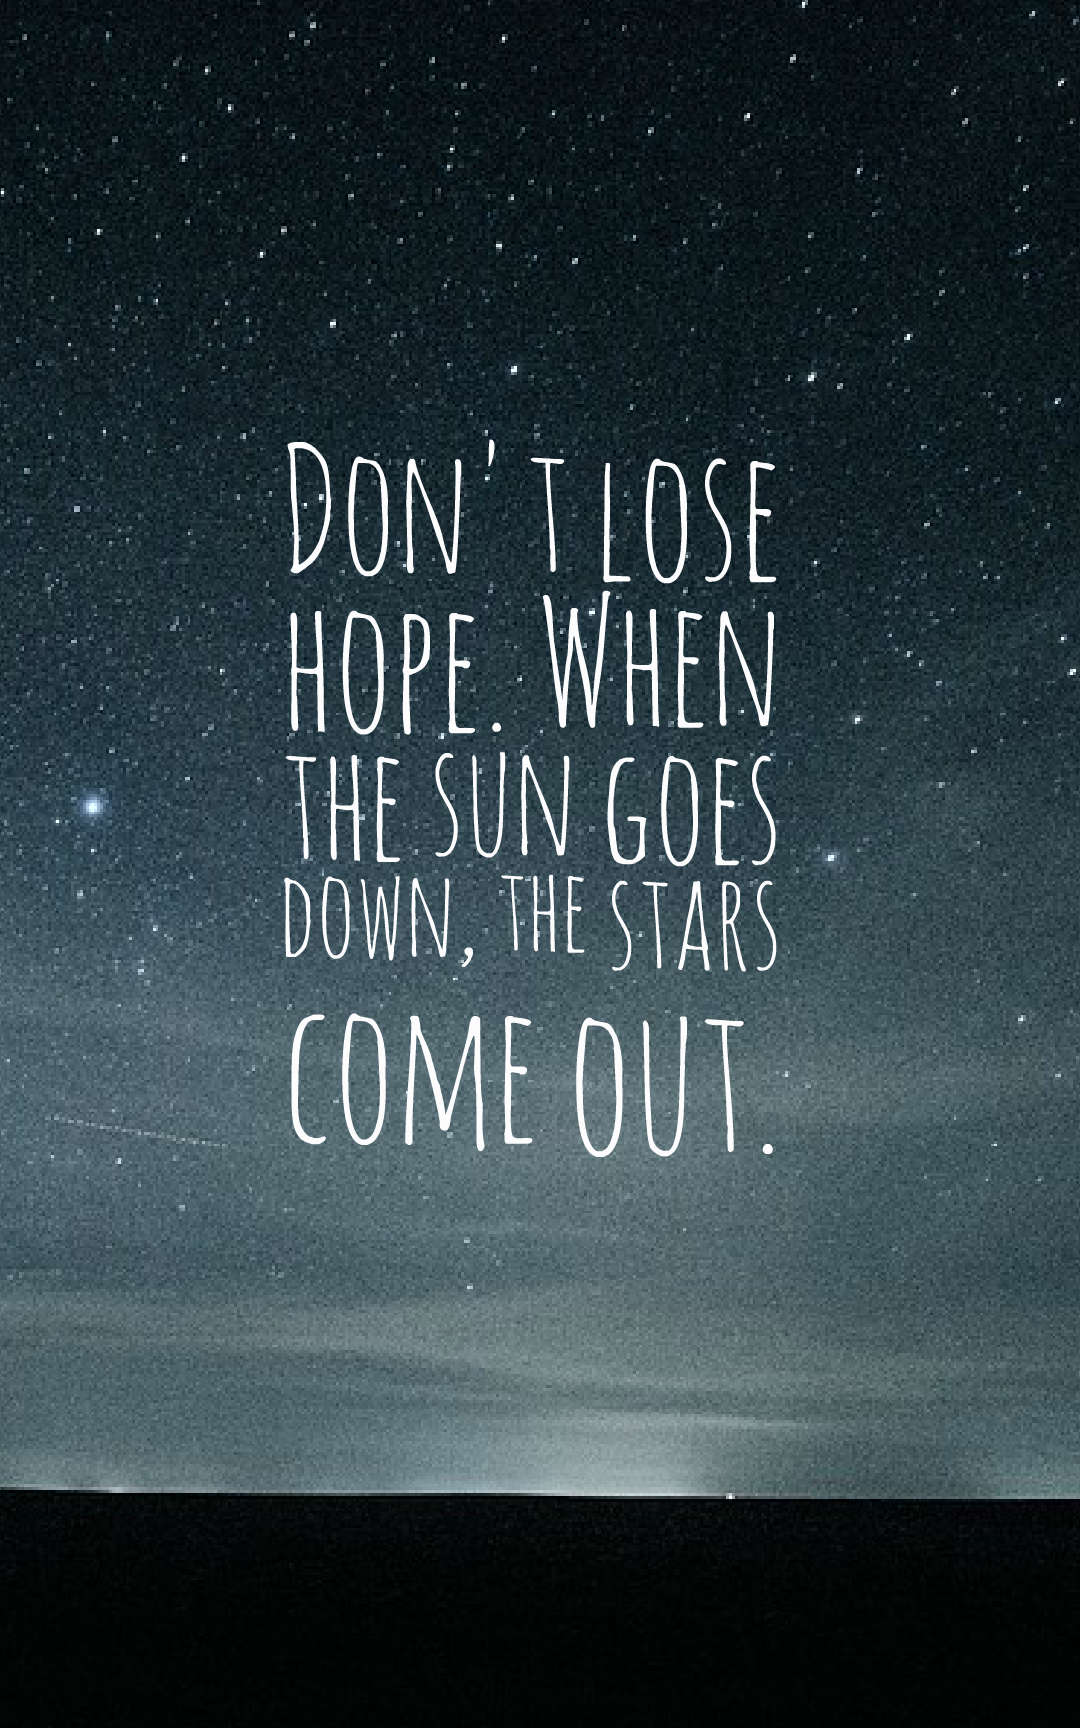 47 Inspirational Hope Quotes And Sayings